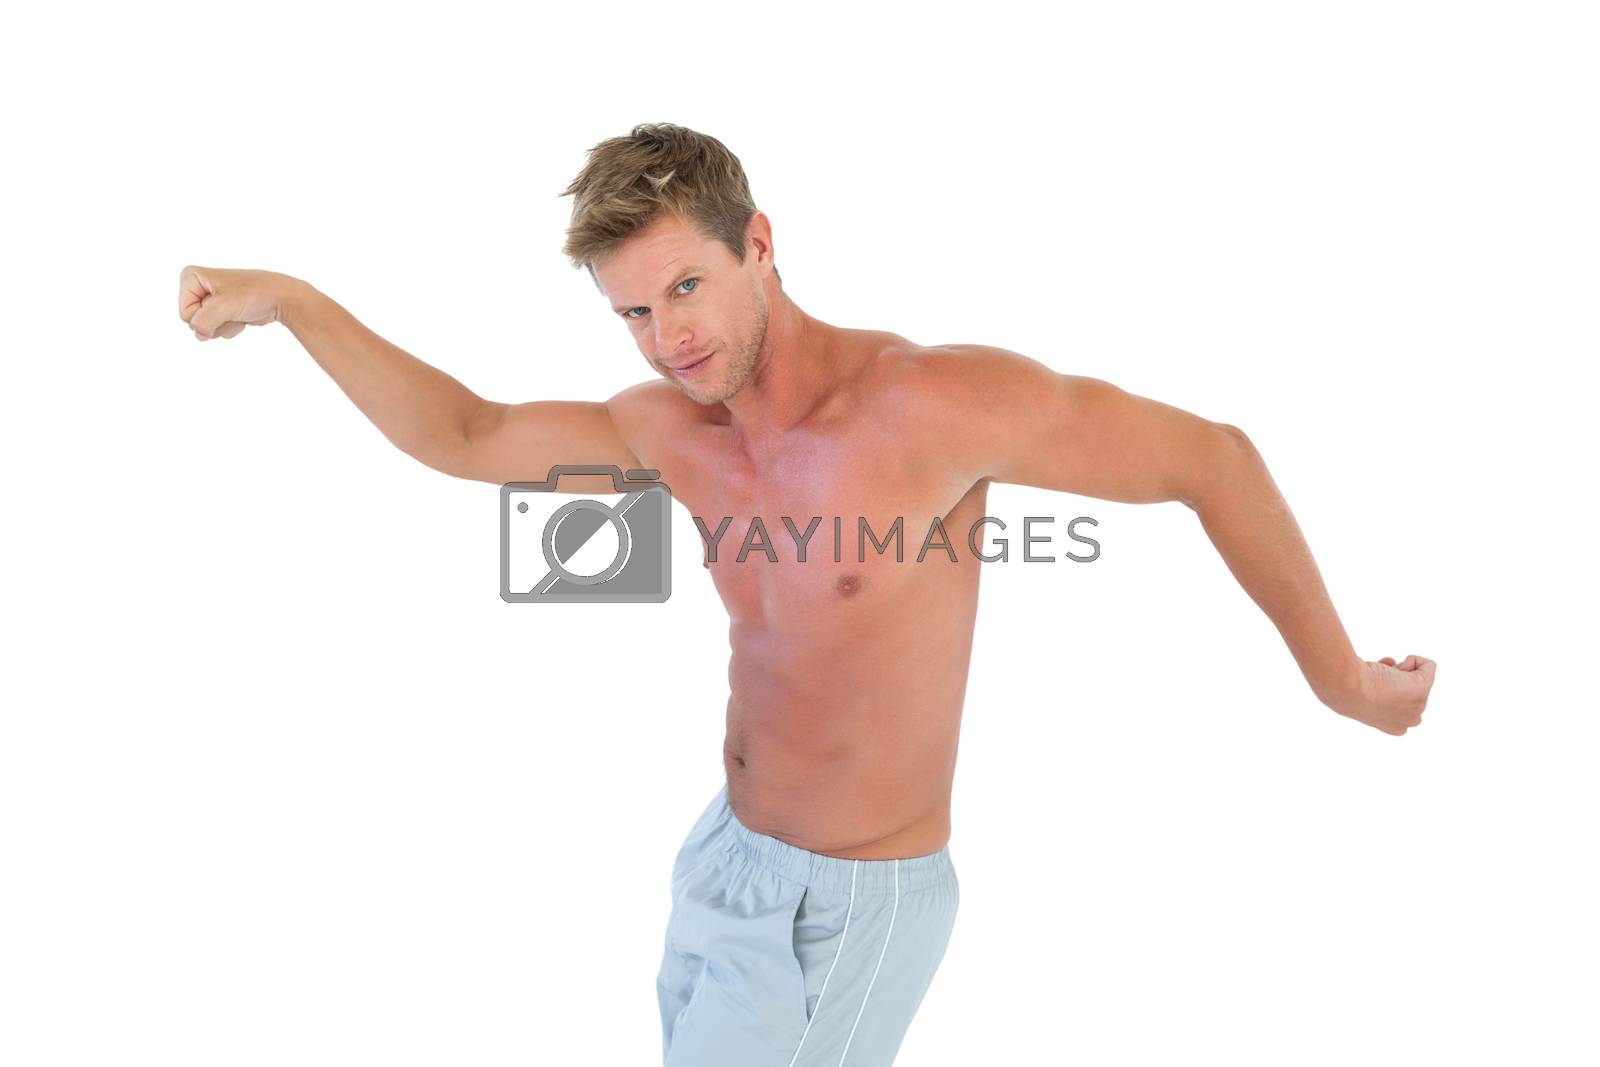 Royalty free image of Shirtless man gesturing and showing his muscles  by Wavebreakmedia